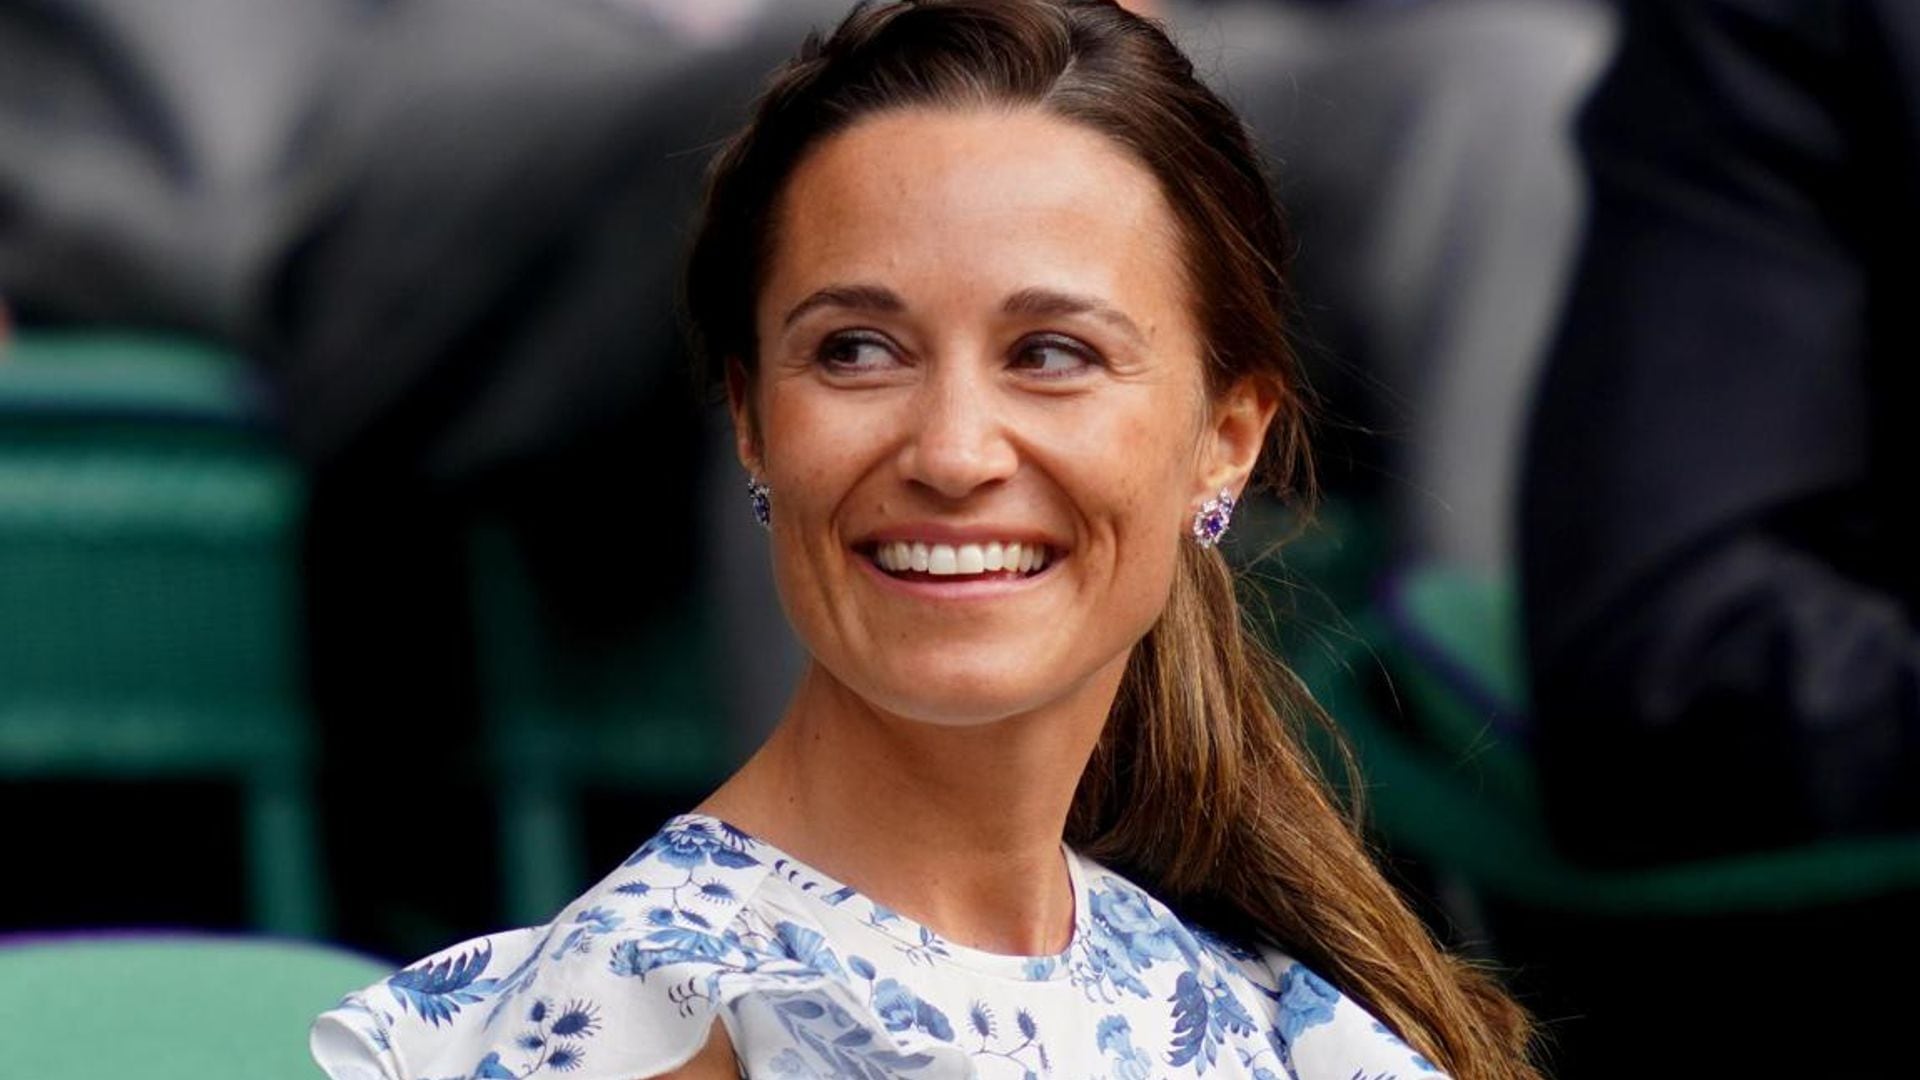 Kate Middleton’s sister Pippa Middleton is an aunt again!